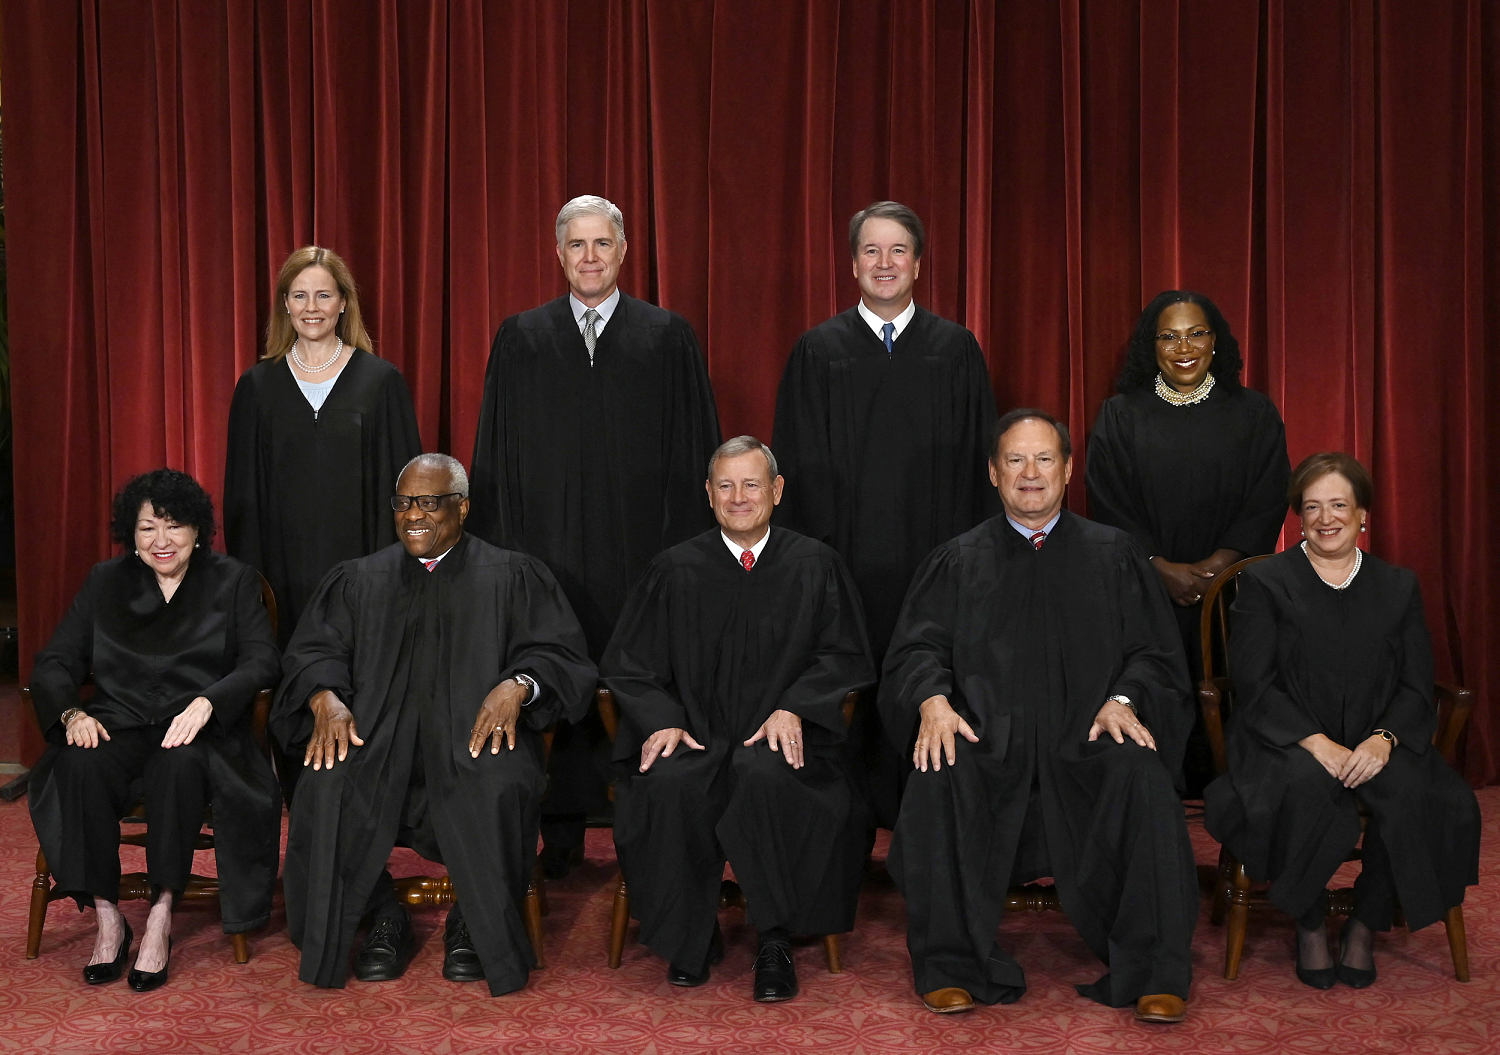 Supreme Court may have accidentally revealed ruling in emergency abortion case